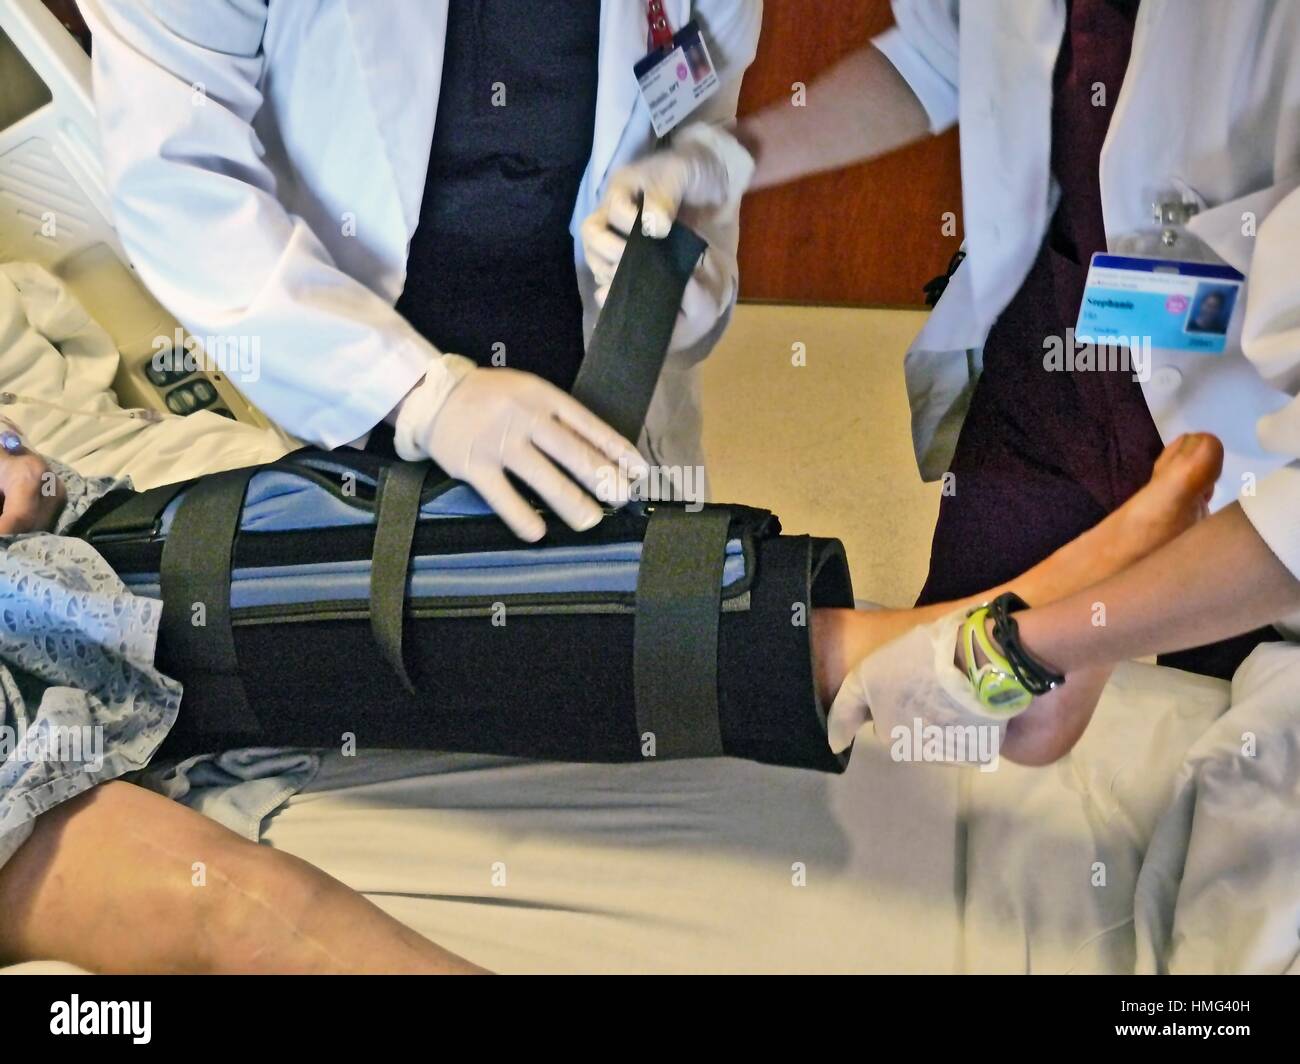 https://c8.alamy.com/comp/HMG40H/a-compression-therapy-leg-brace-is-fitted-to-a-hospital-patient-following-HMG40H.jpg